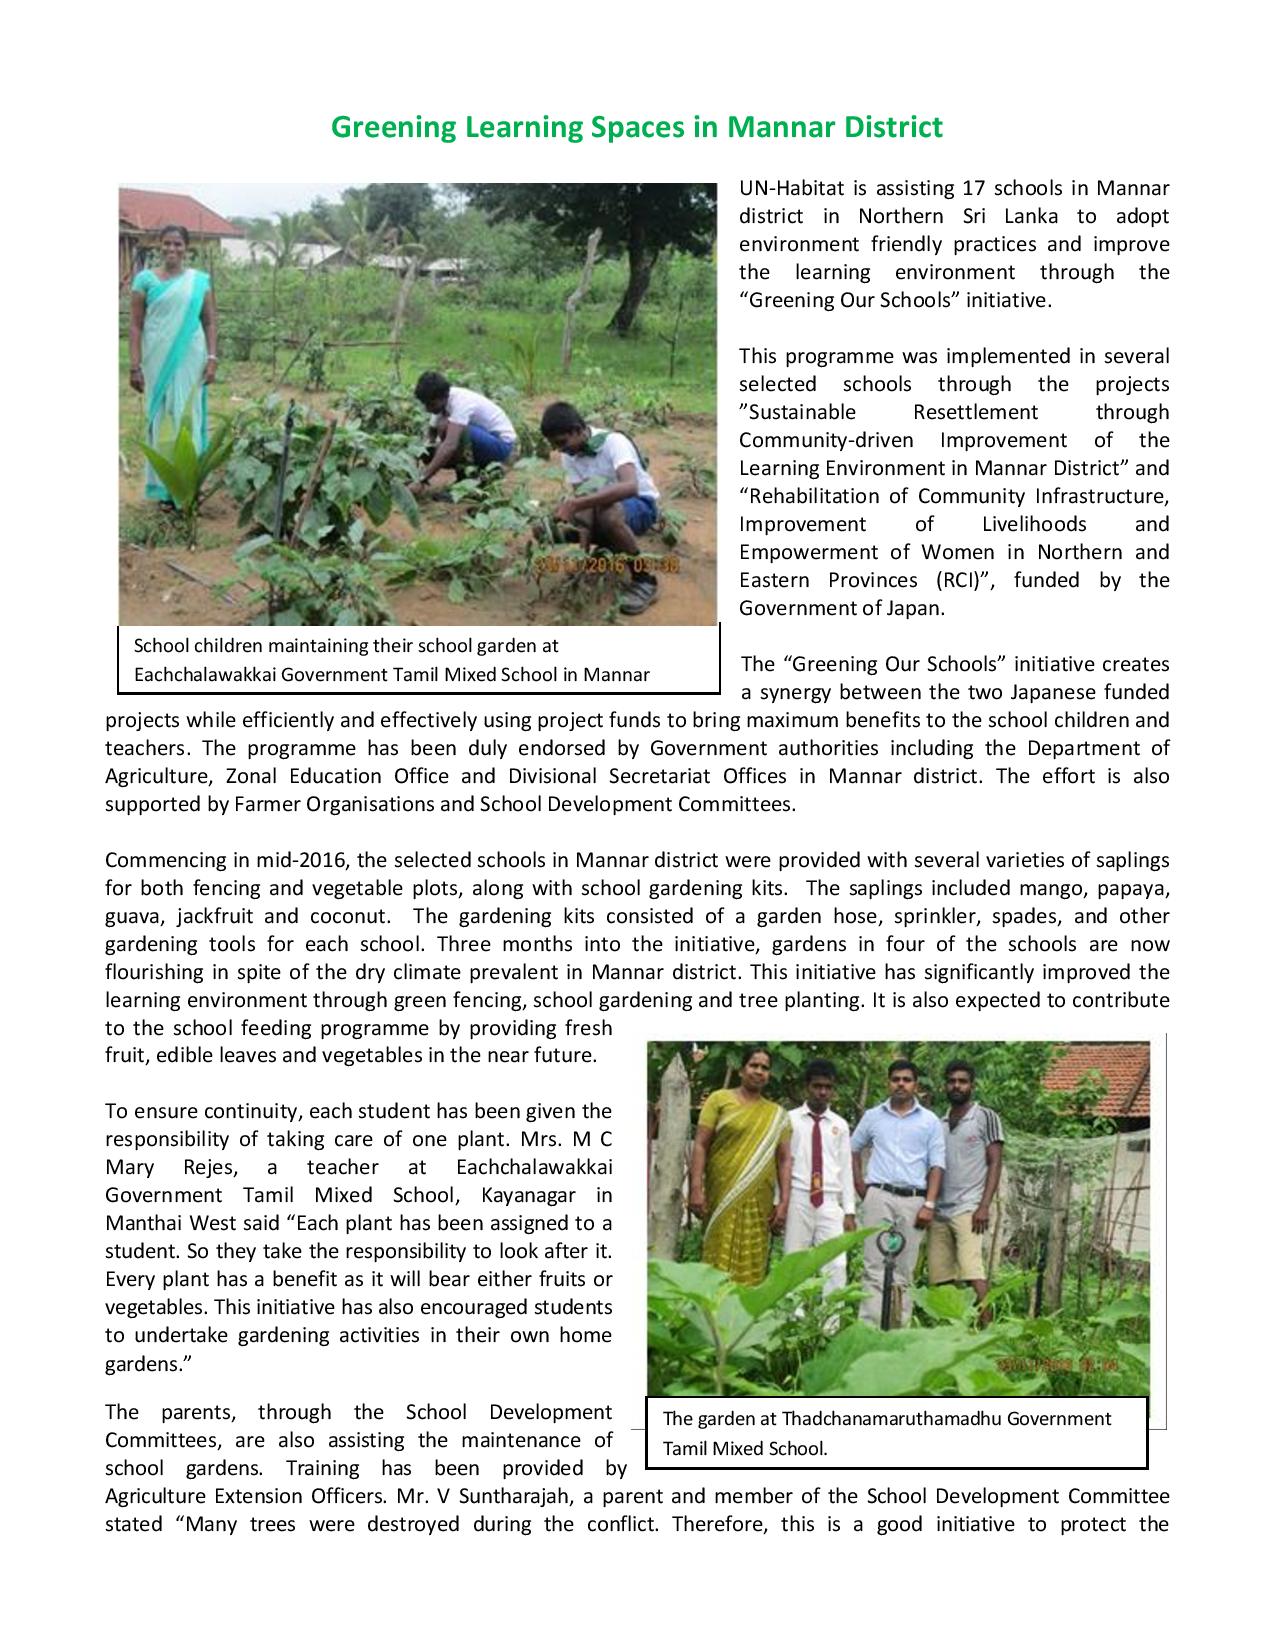 Greening Learning Spaces in Mannar District, Sri Lanka